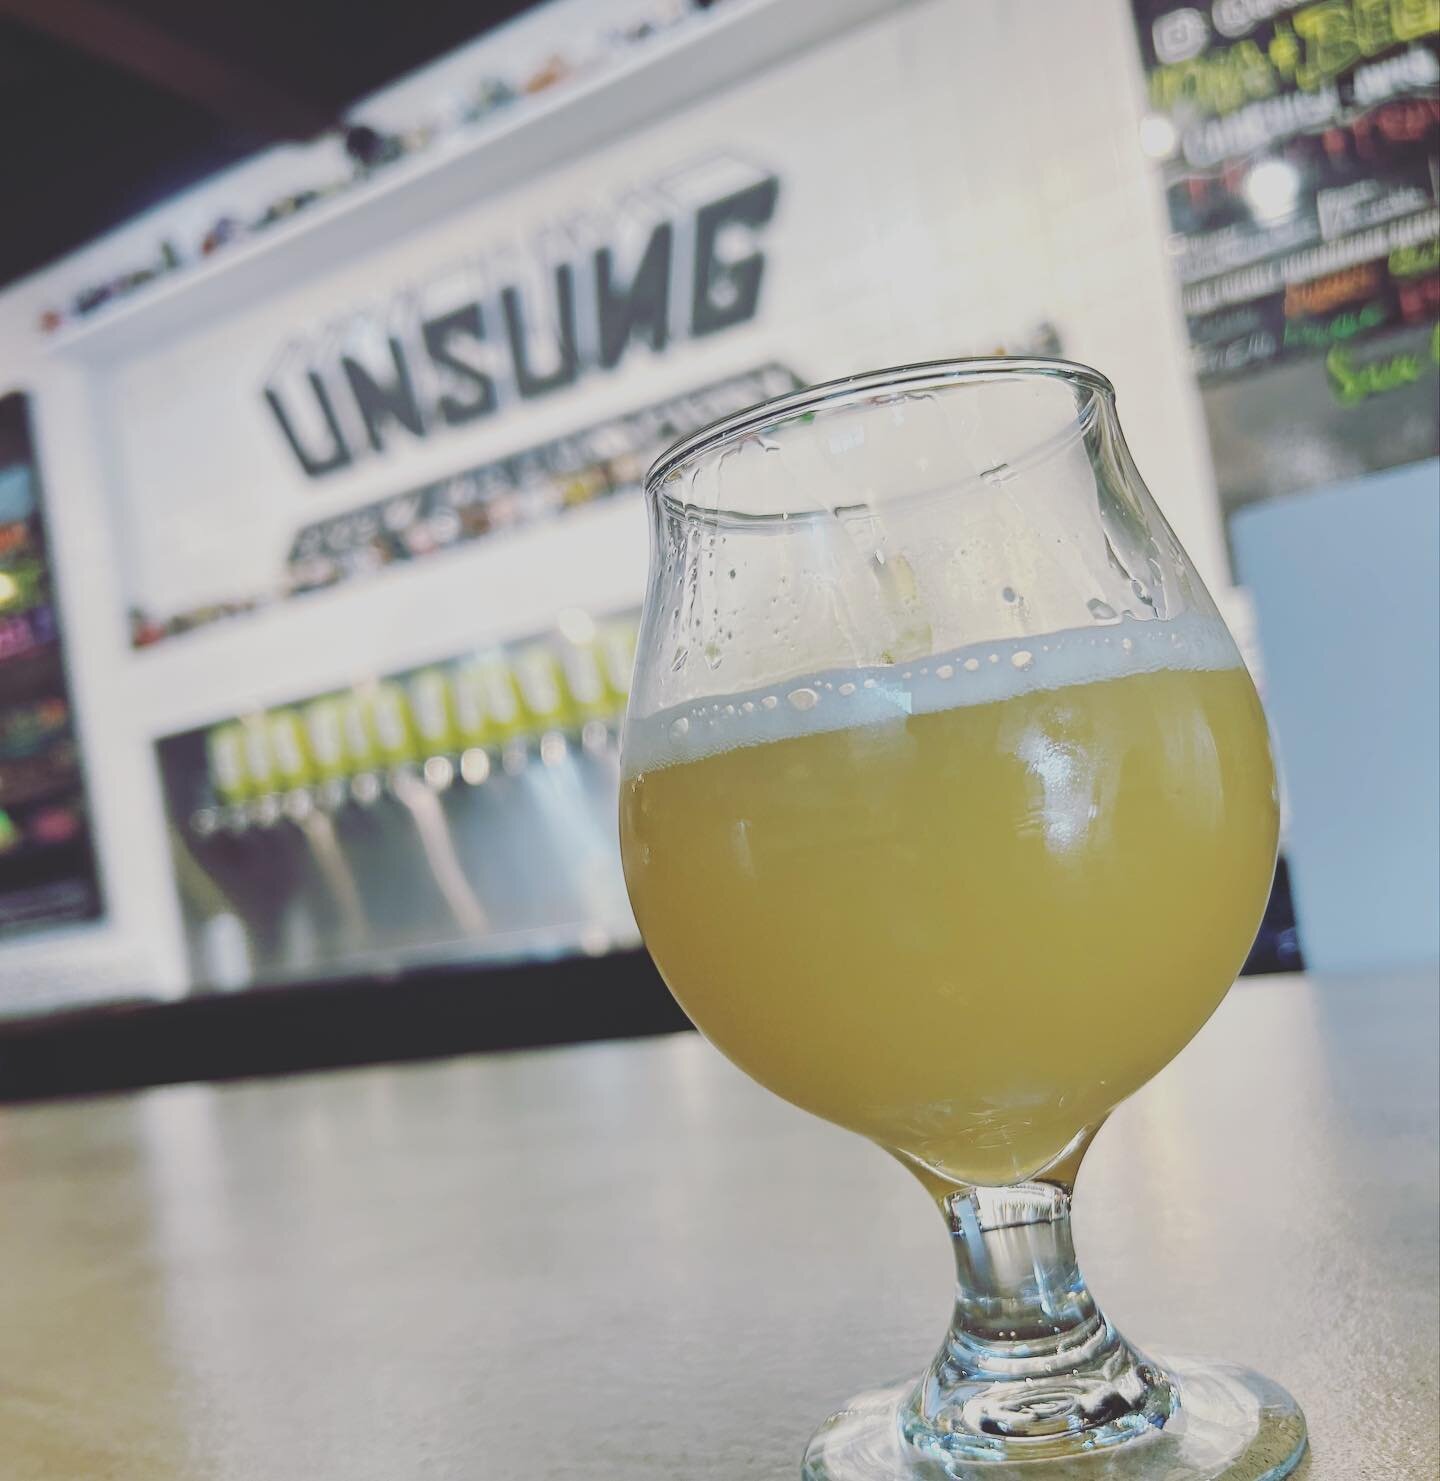 Grabbin&rsquo; a pint of goodness over at @unsungbrewing - stop by their taproom next time you&rsquo;re in Anaheim 🍻🍻 #anaheim #saturday